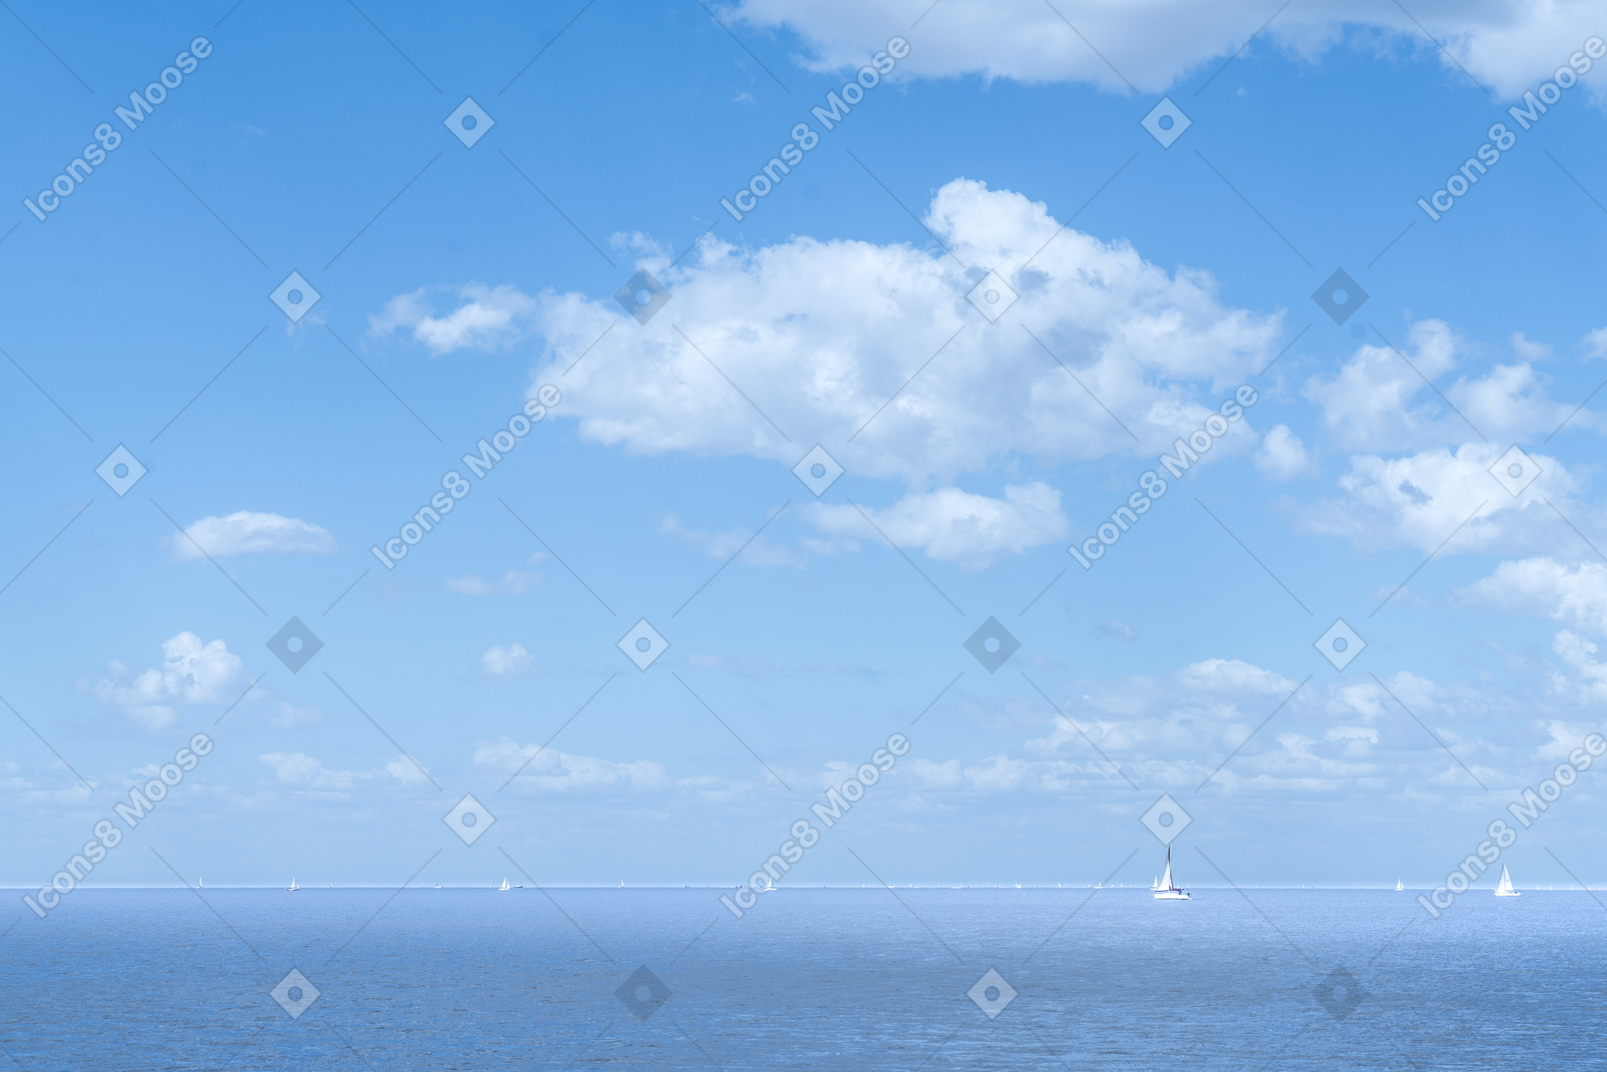 Scenic view of boats sailing on a sunny day